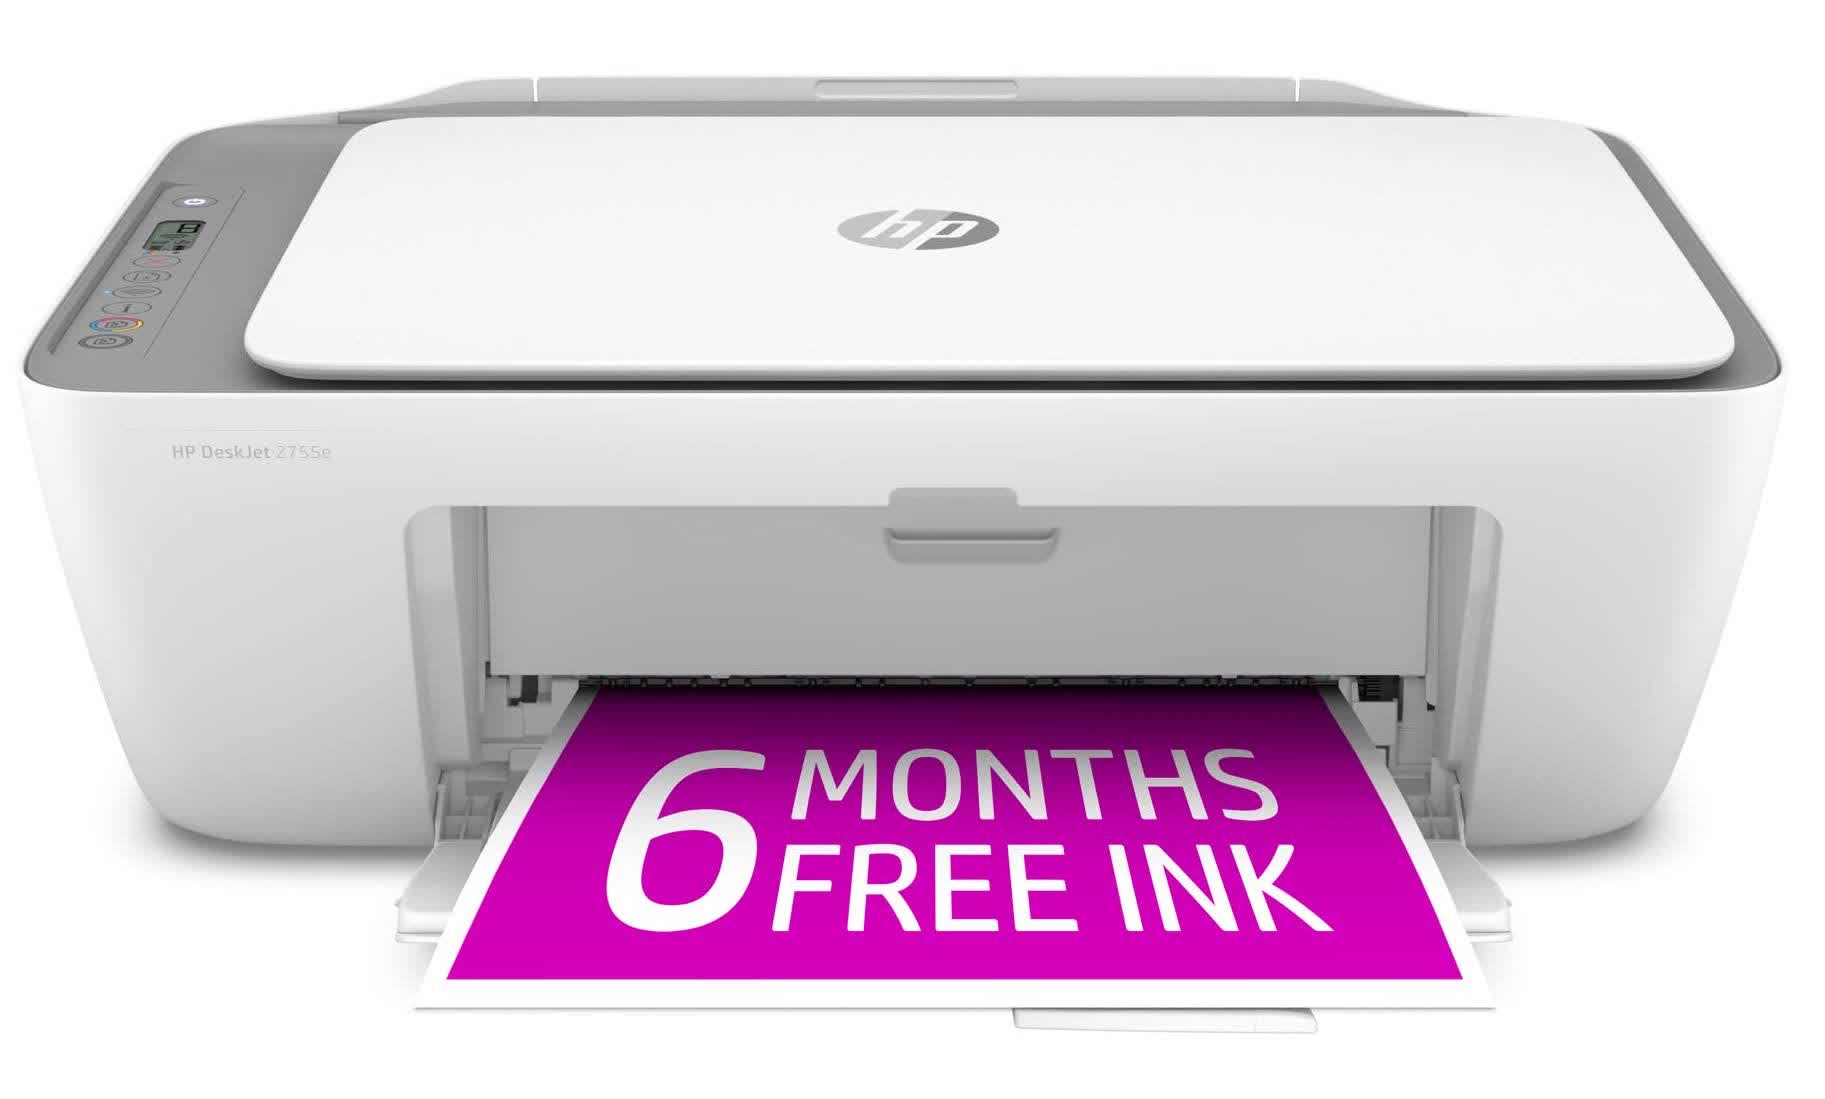 HP has discovered a brand new means so as to add ink cartridge DRM to your printer